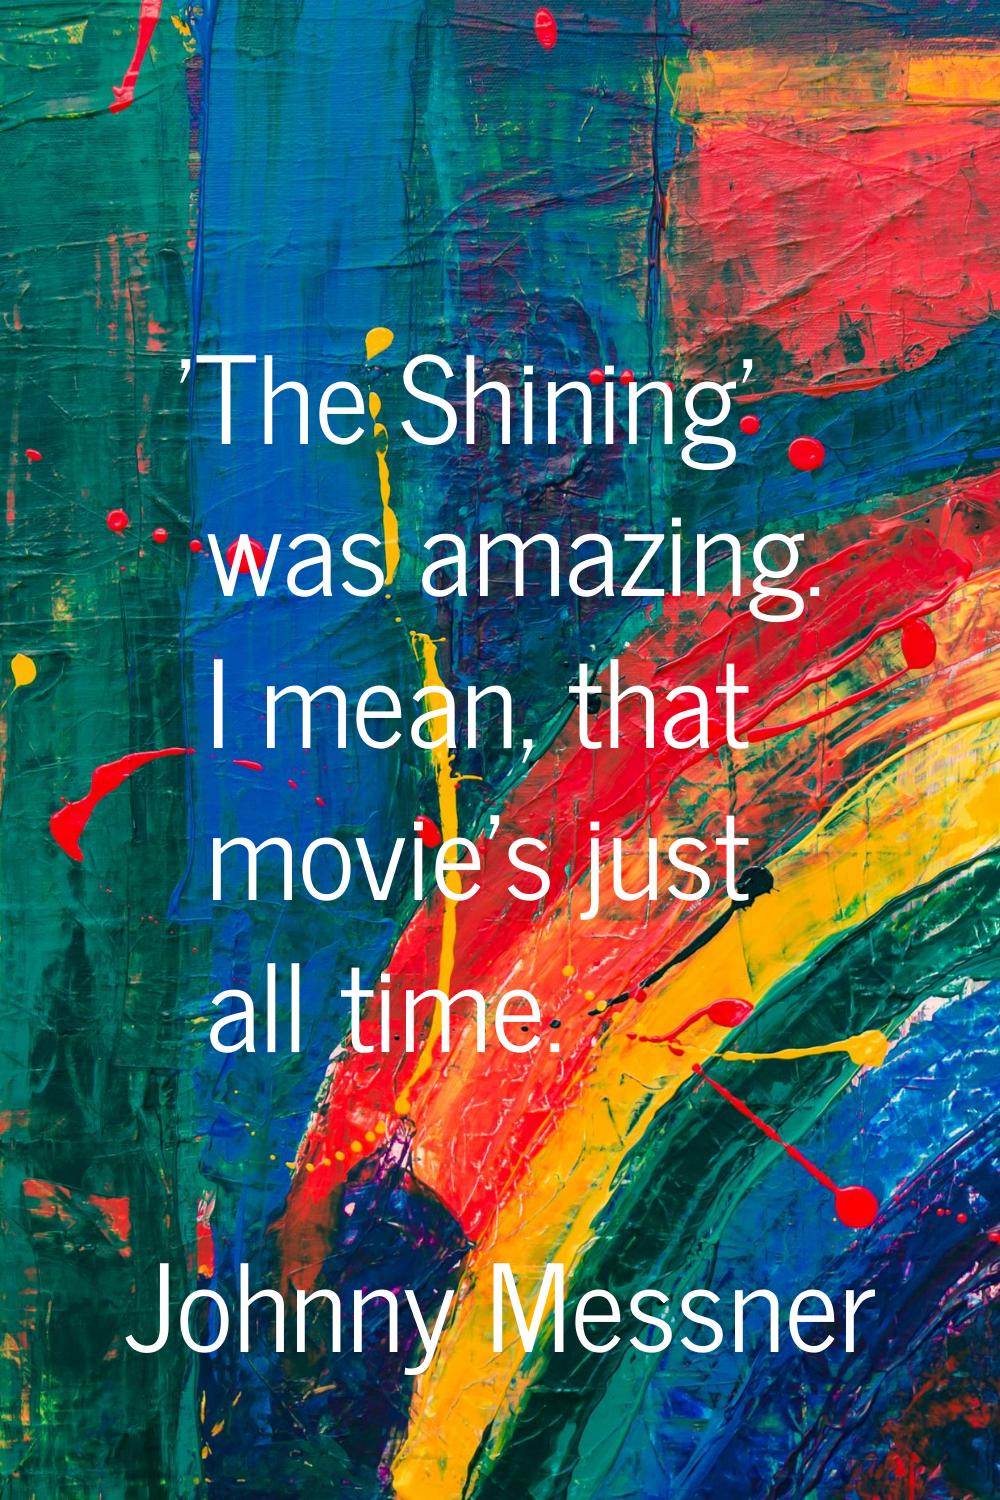 'The Shining' was amazing. I mean, that movie's just all time.